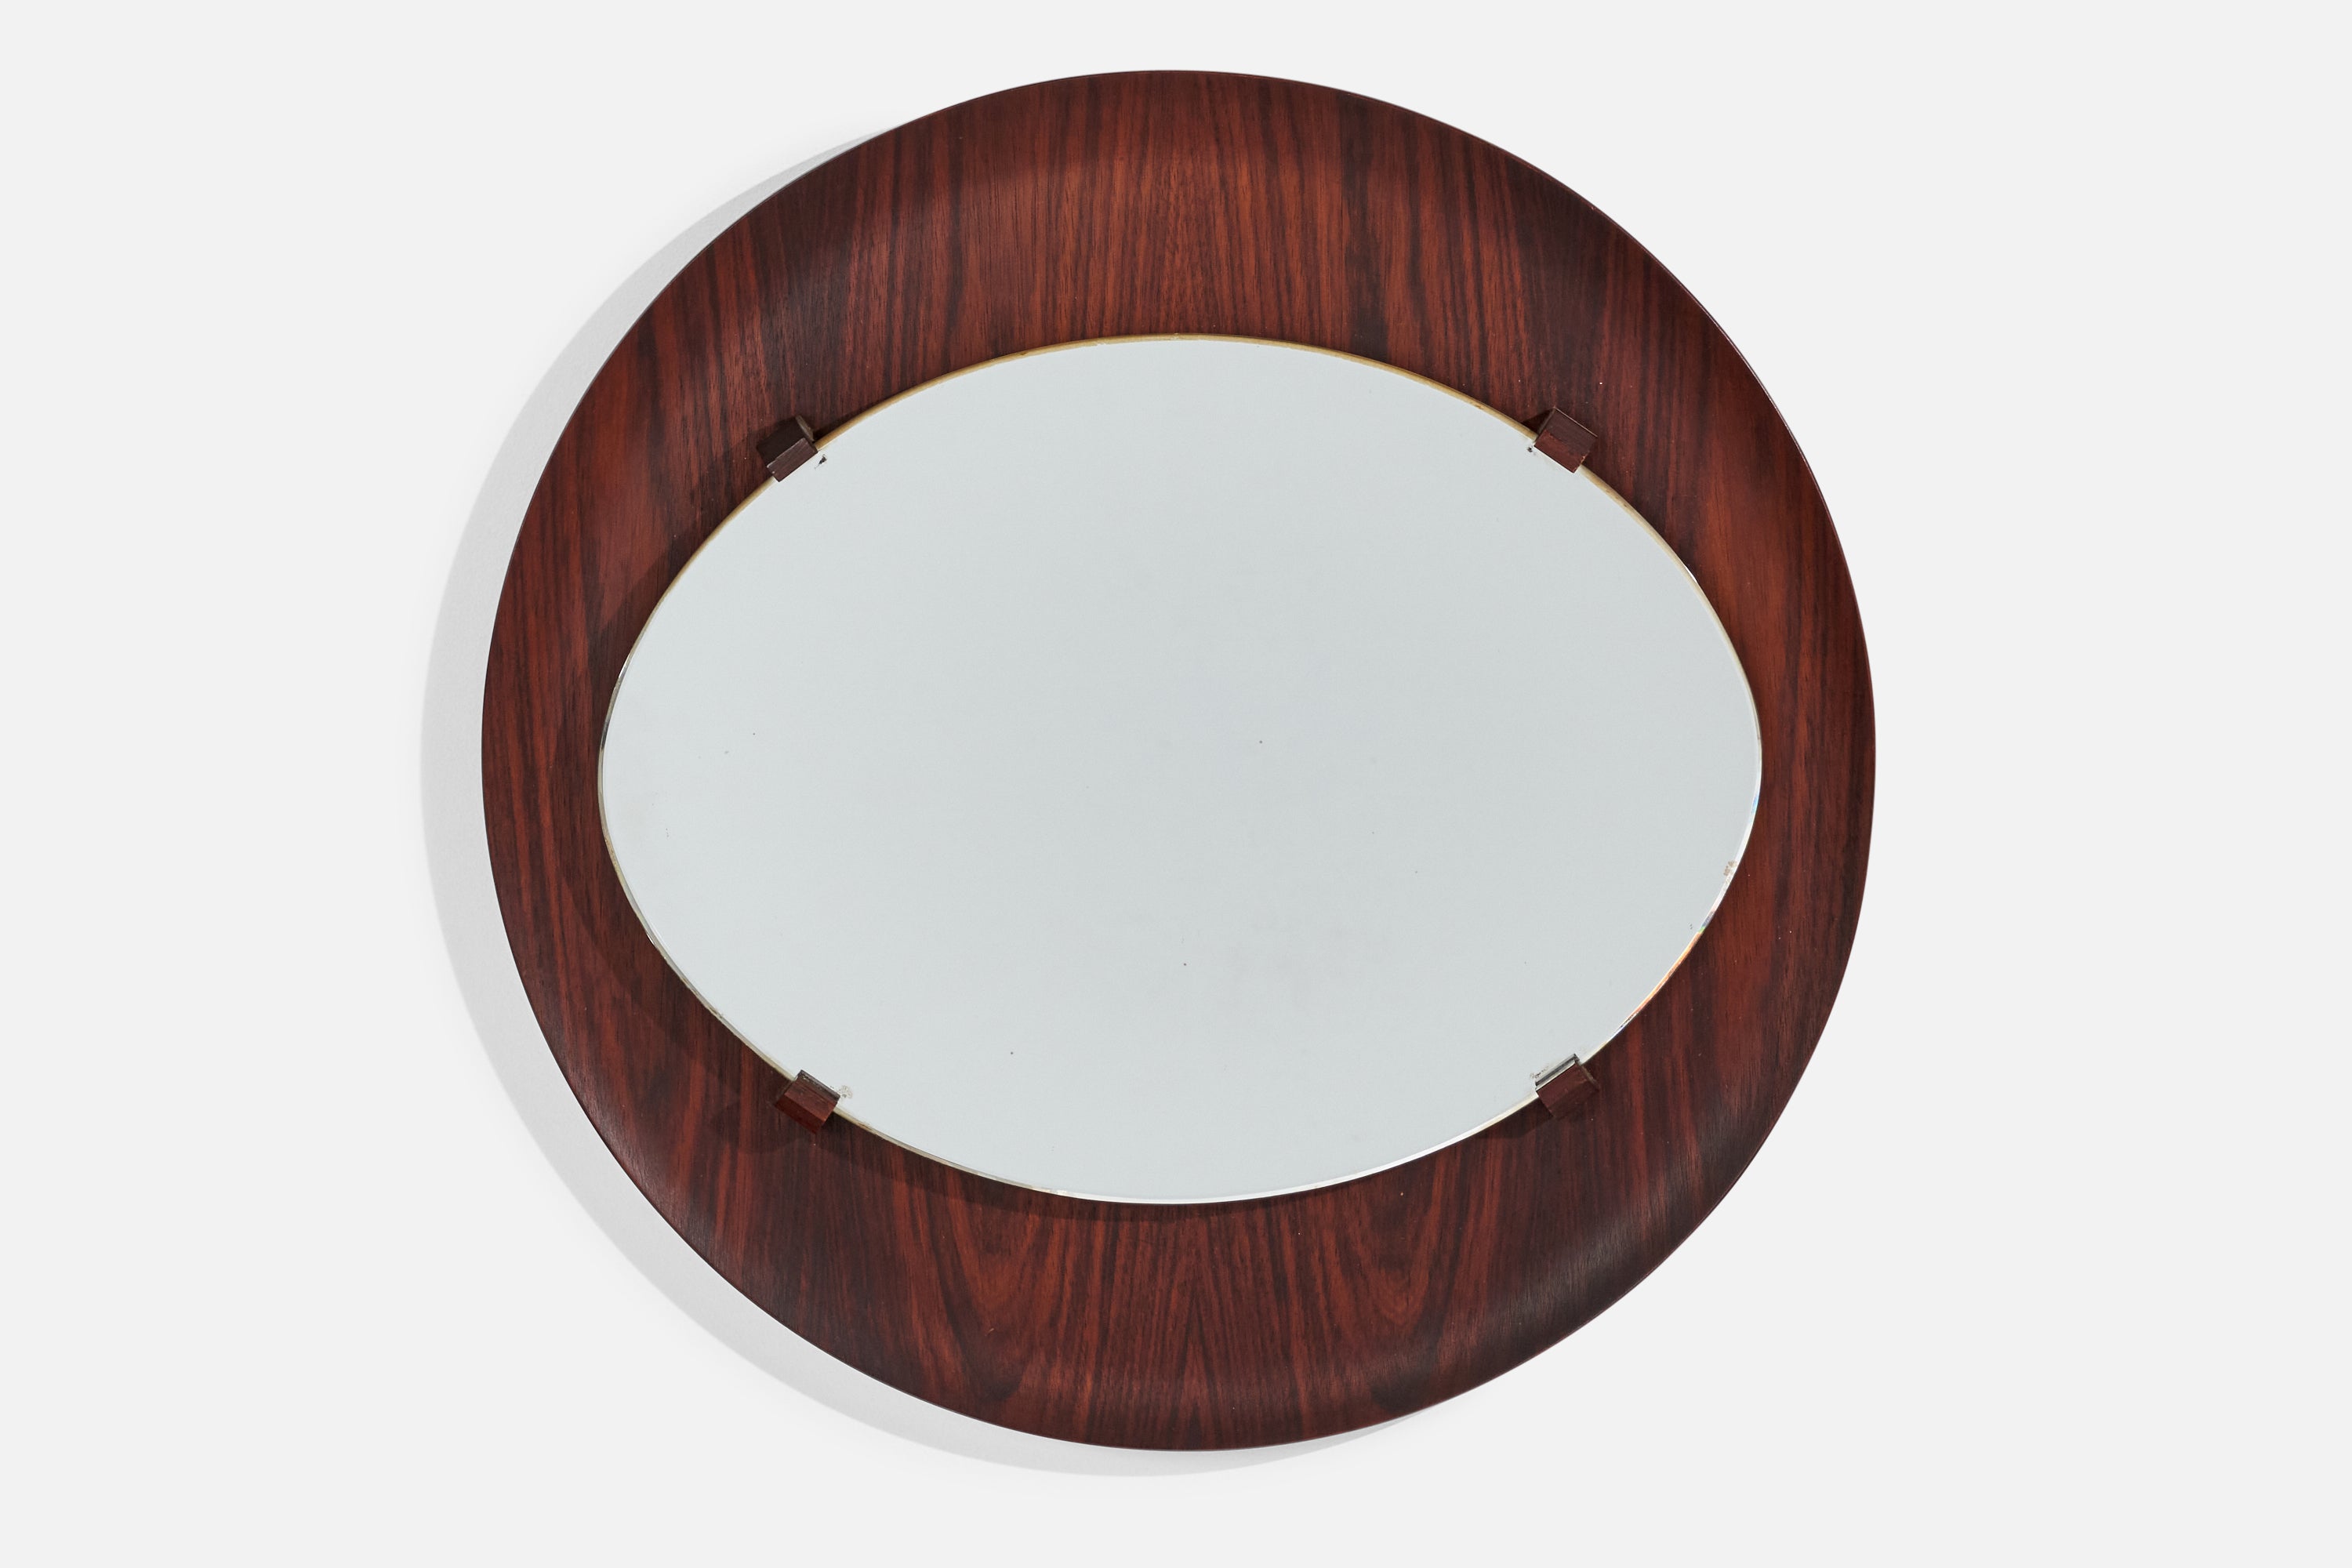 Campo & Graffi 'Attributed', Wall Mirror, Rosewood, Mirror Glass, Italy, 1950s